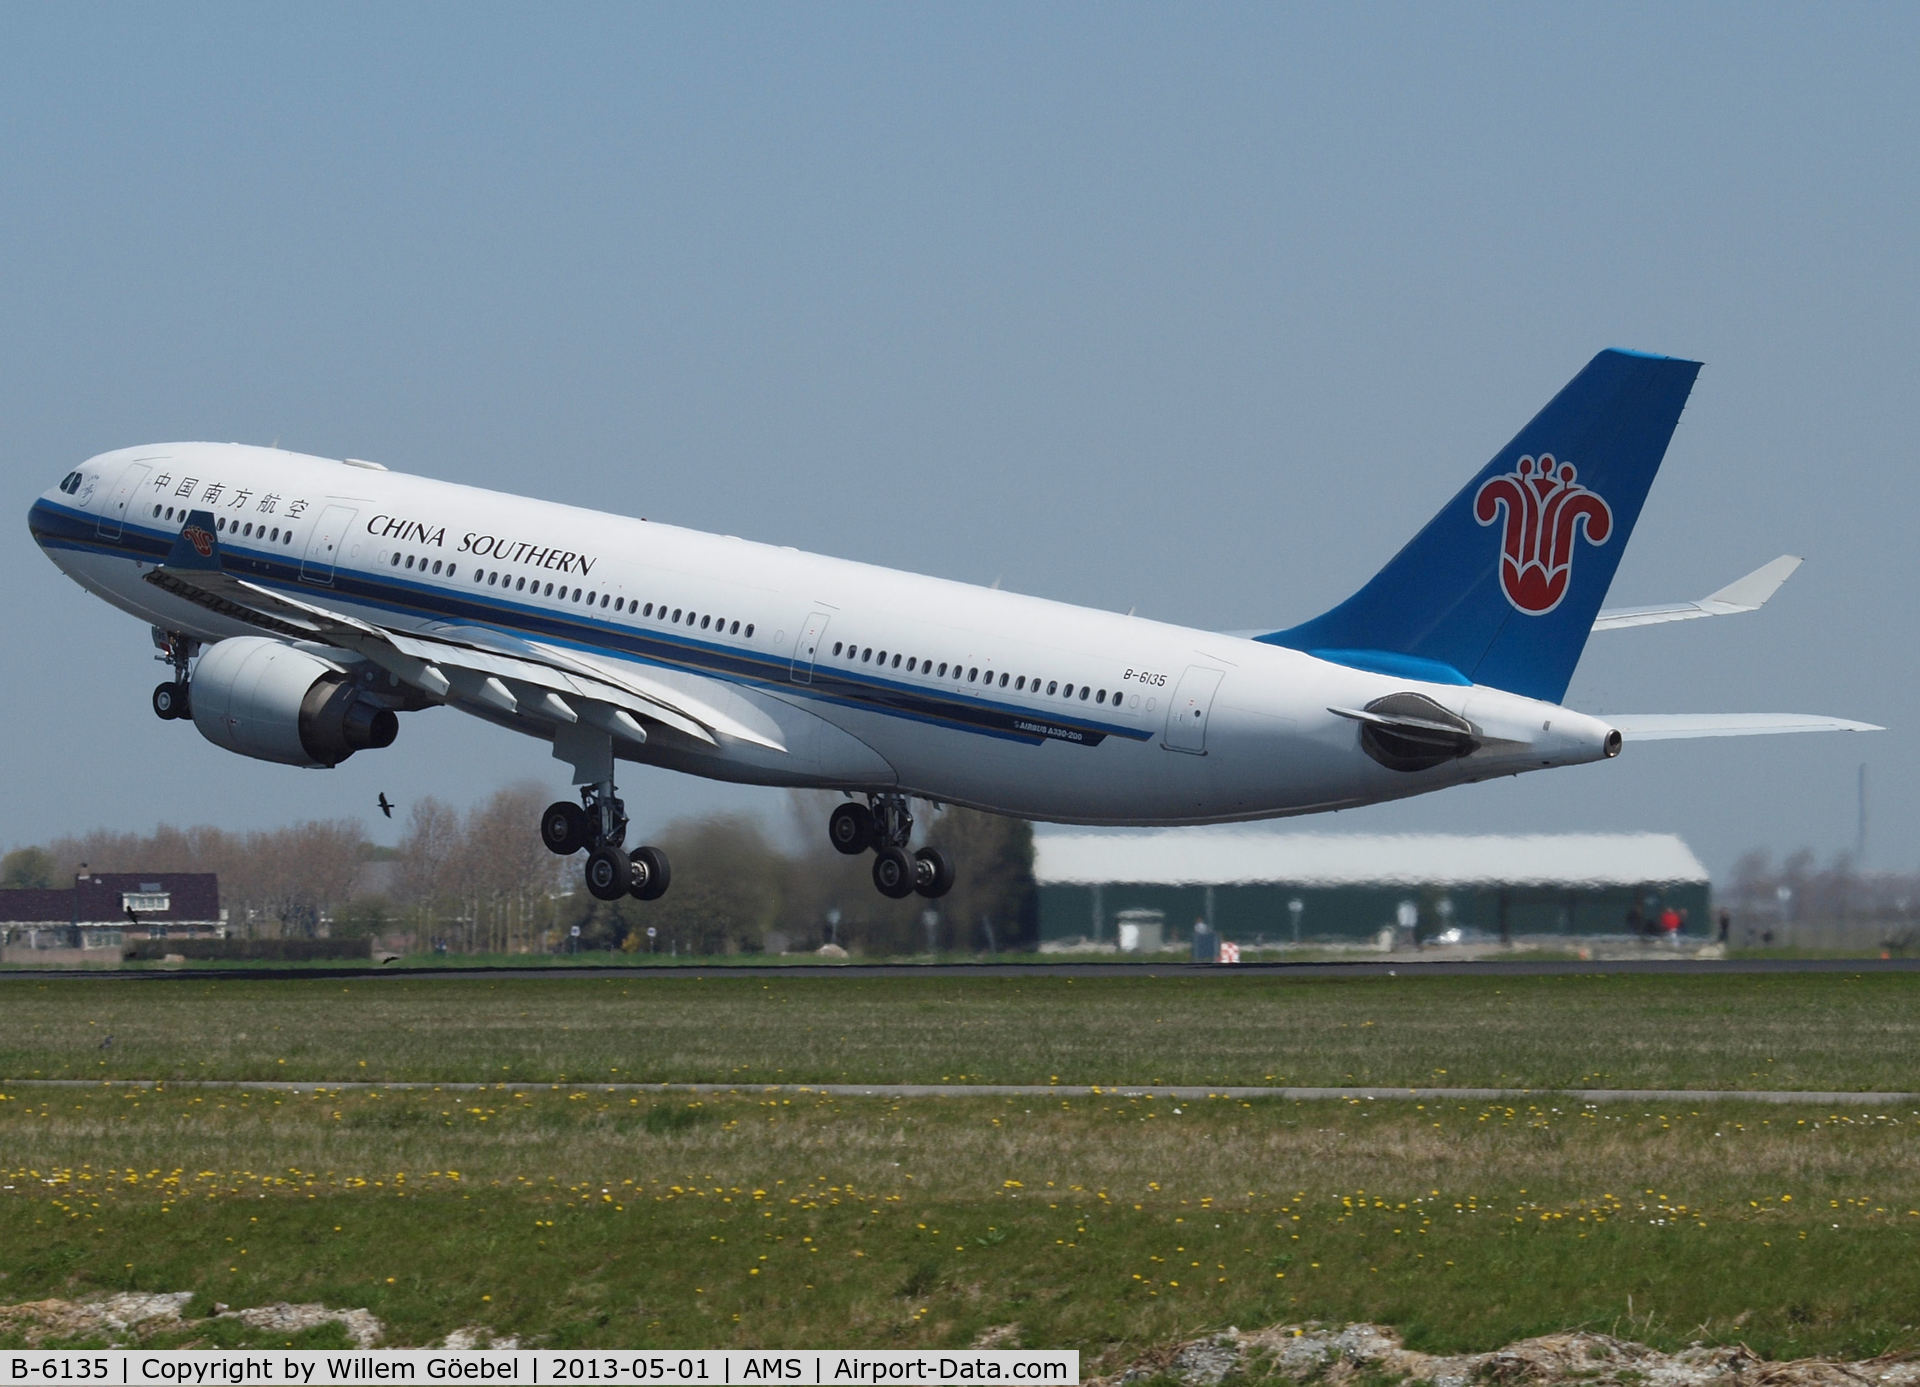 B-6135, 2010 Airbus A330-223 C/N 1096, Take off from runway 36L of Schiphol Airport